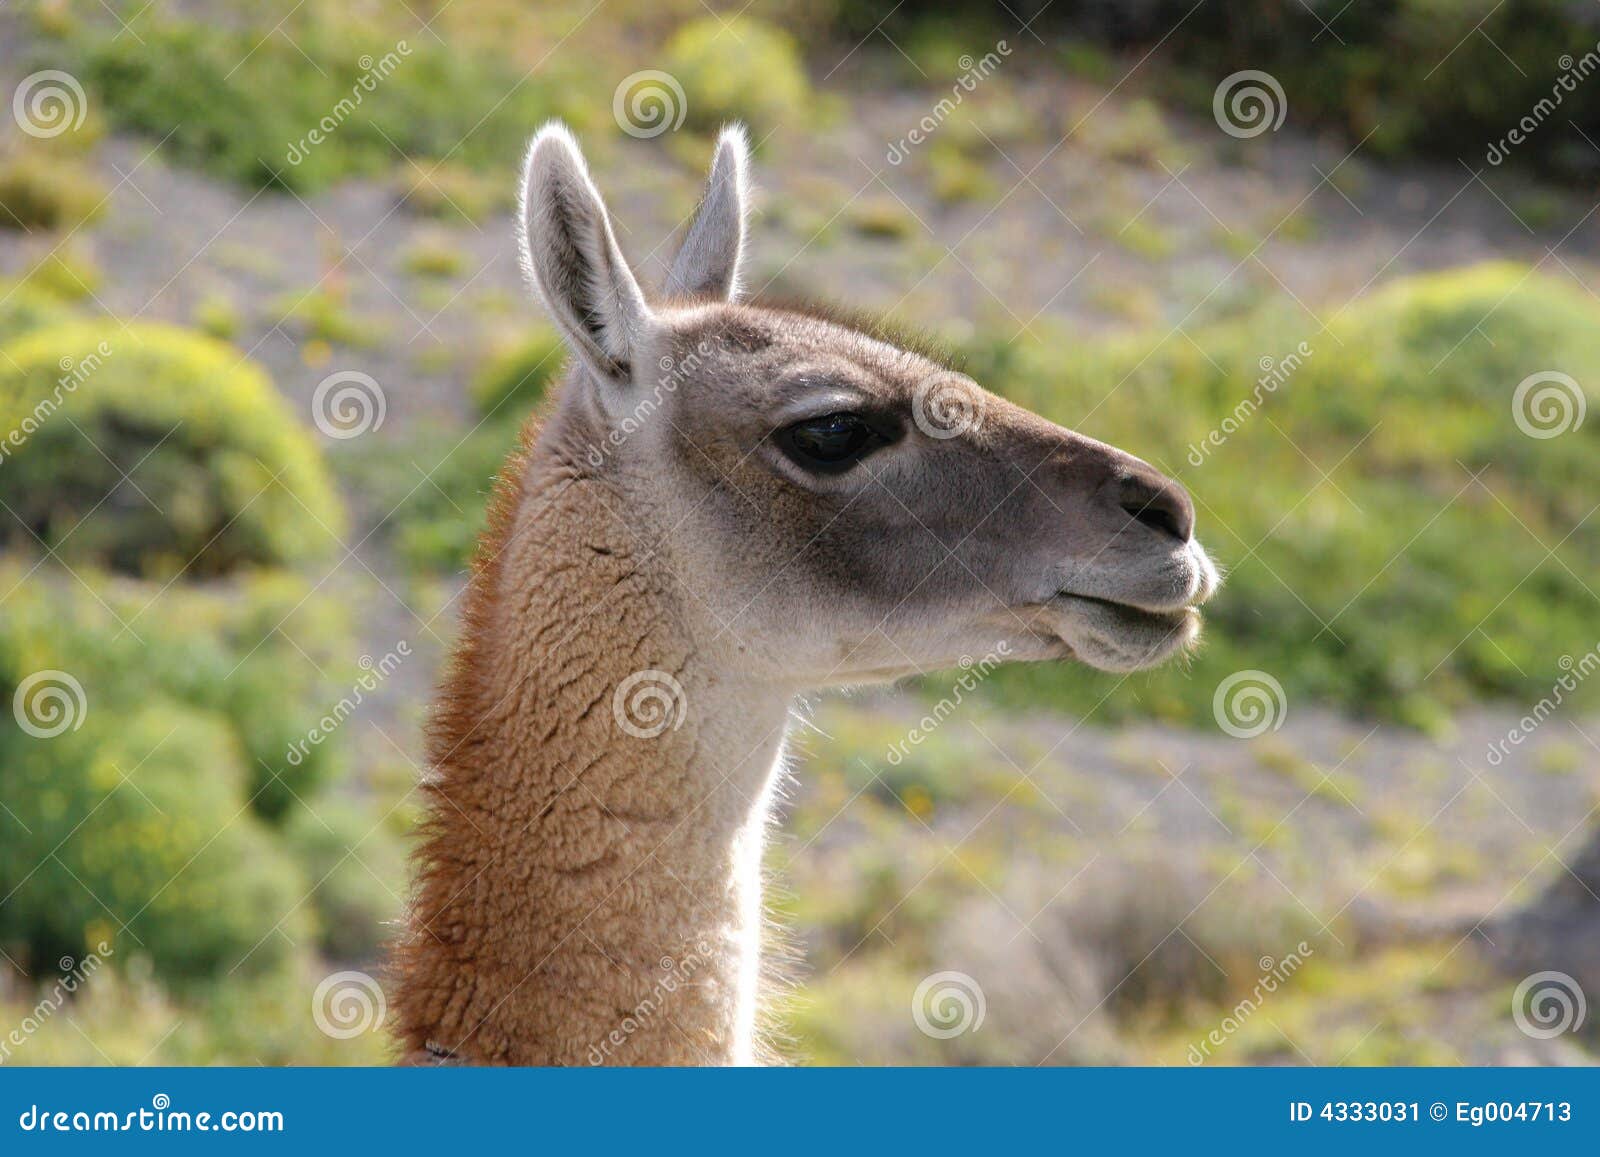 guanaco in national park torres del paine